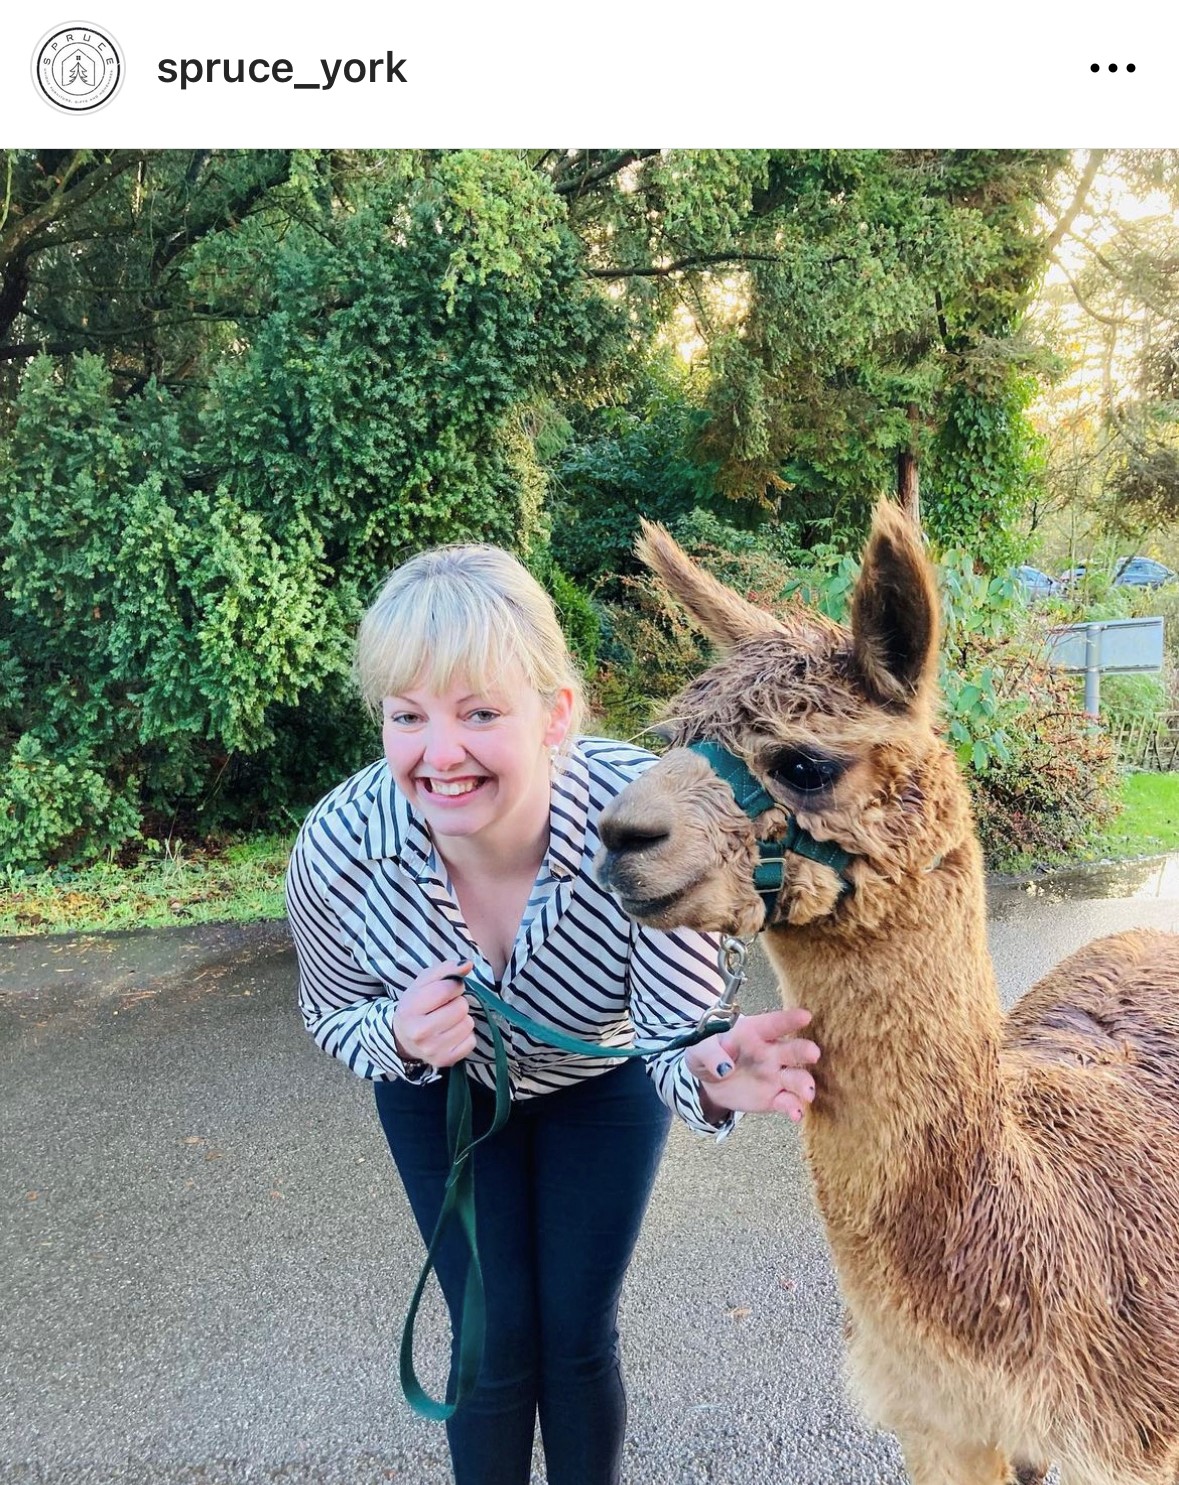 Rebecca From Spruce York with an Alpaca